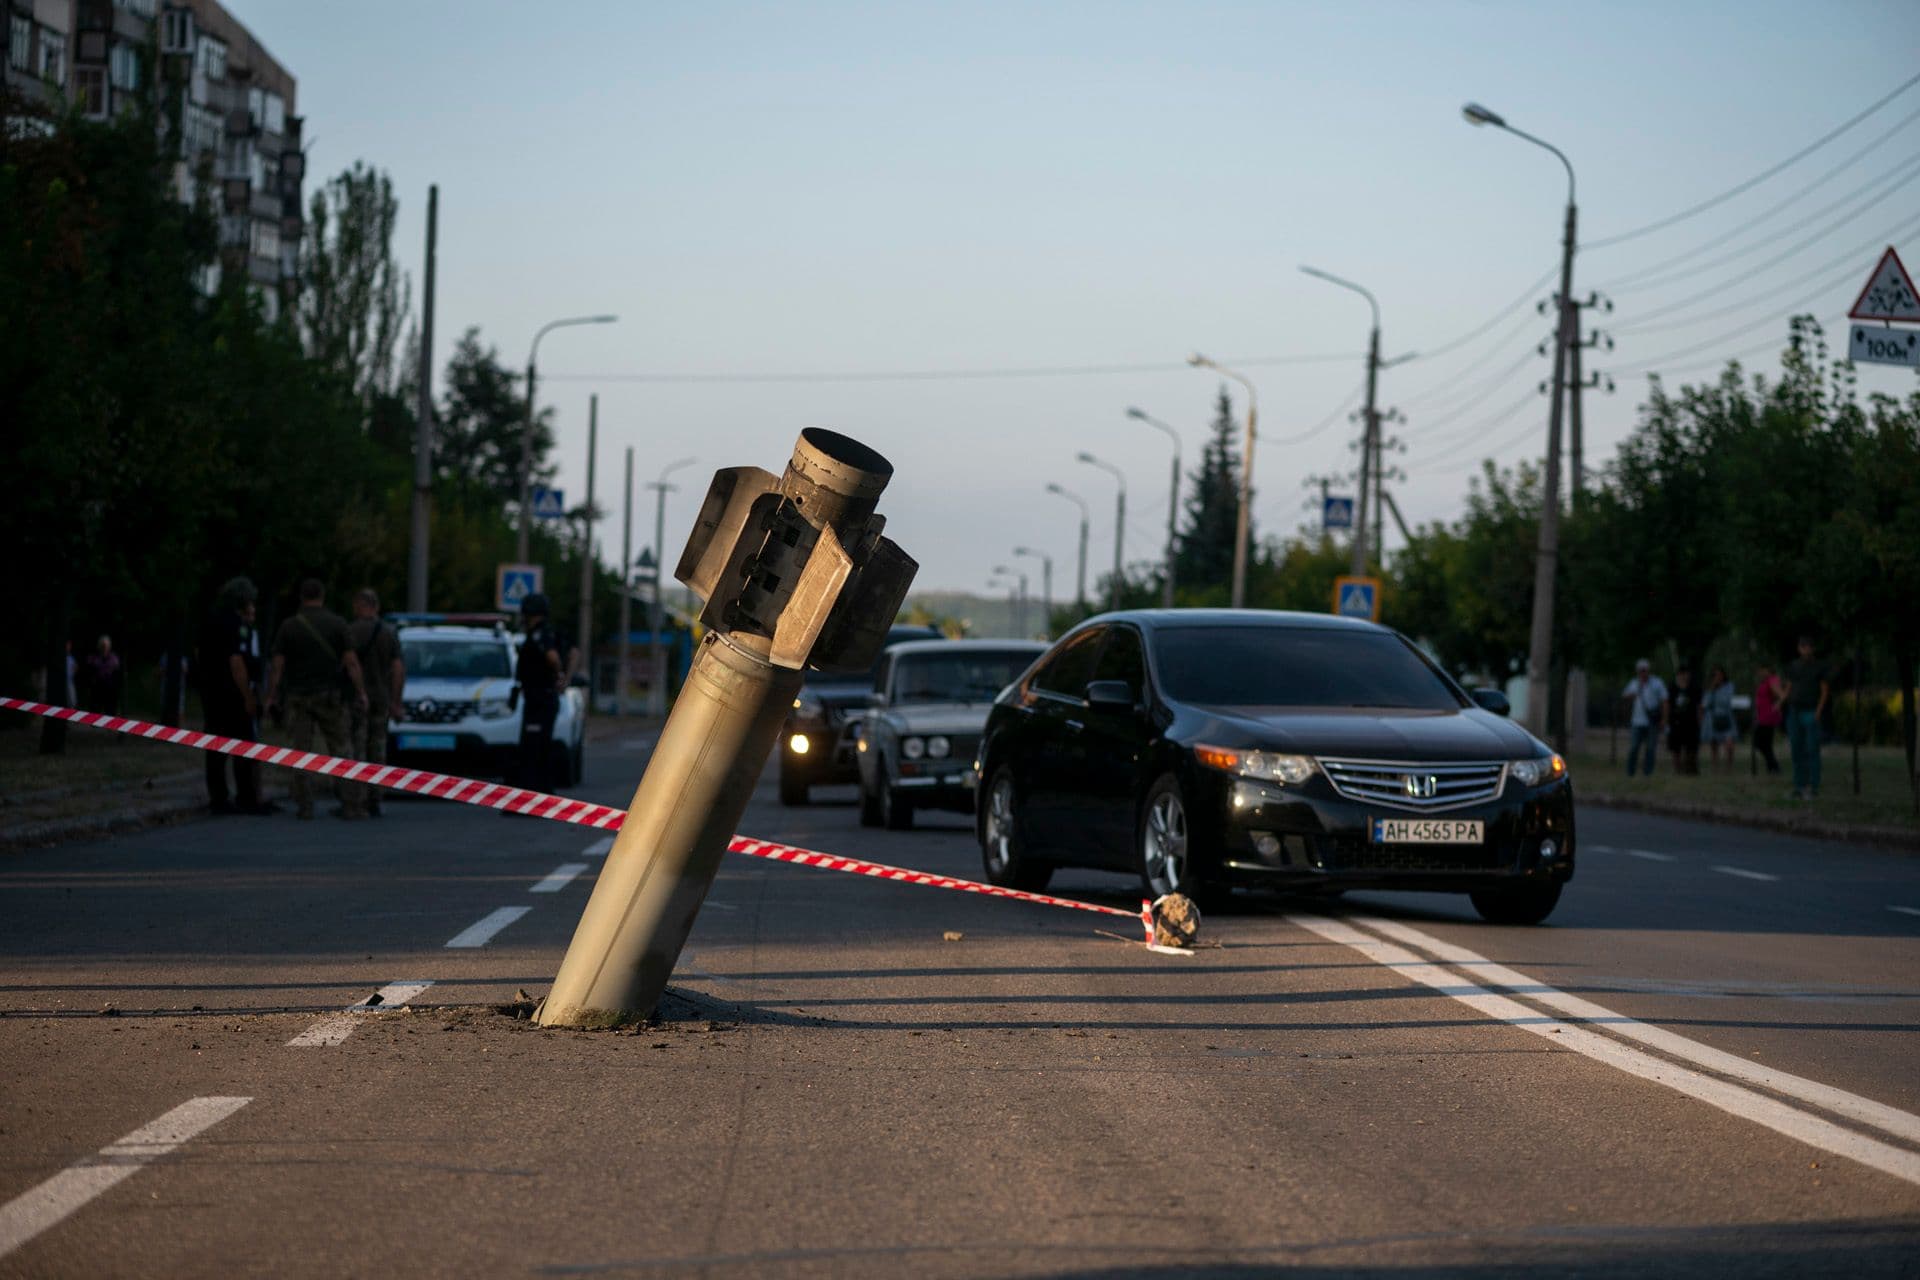 A rocket hit the roadway in Kramatorsk, near an apartment building